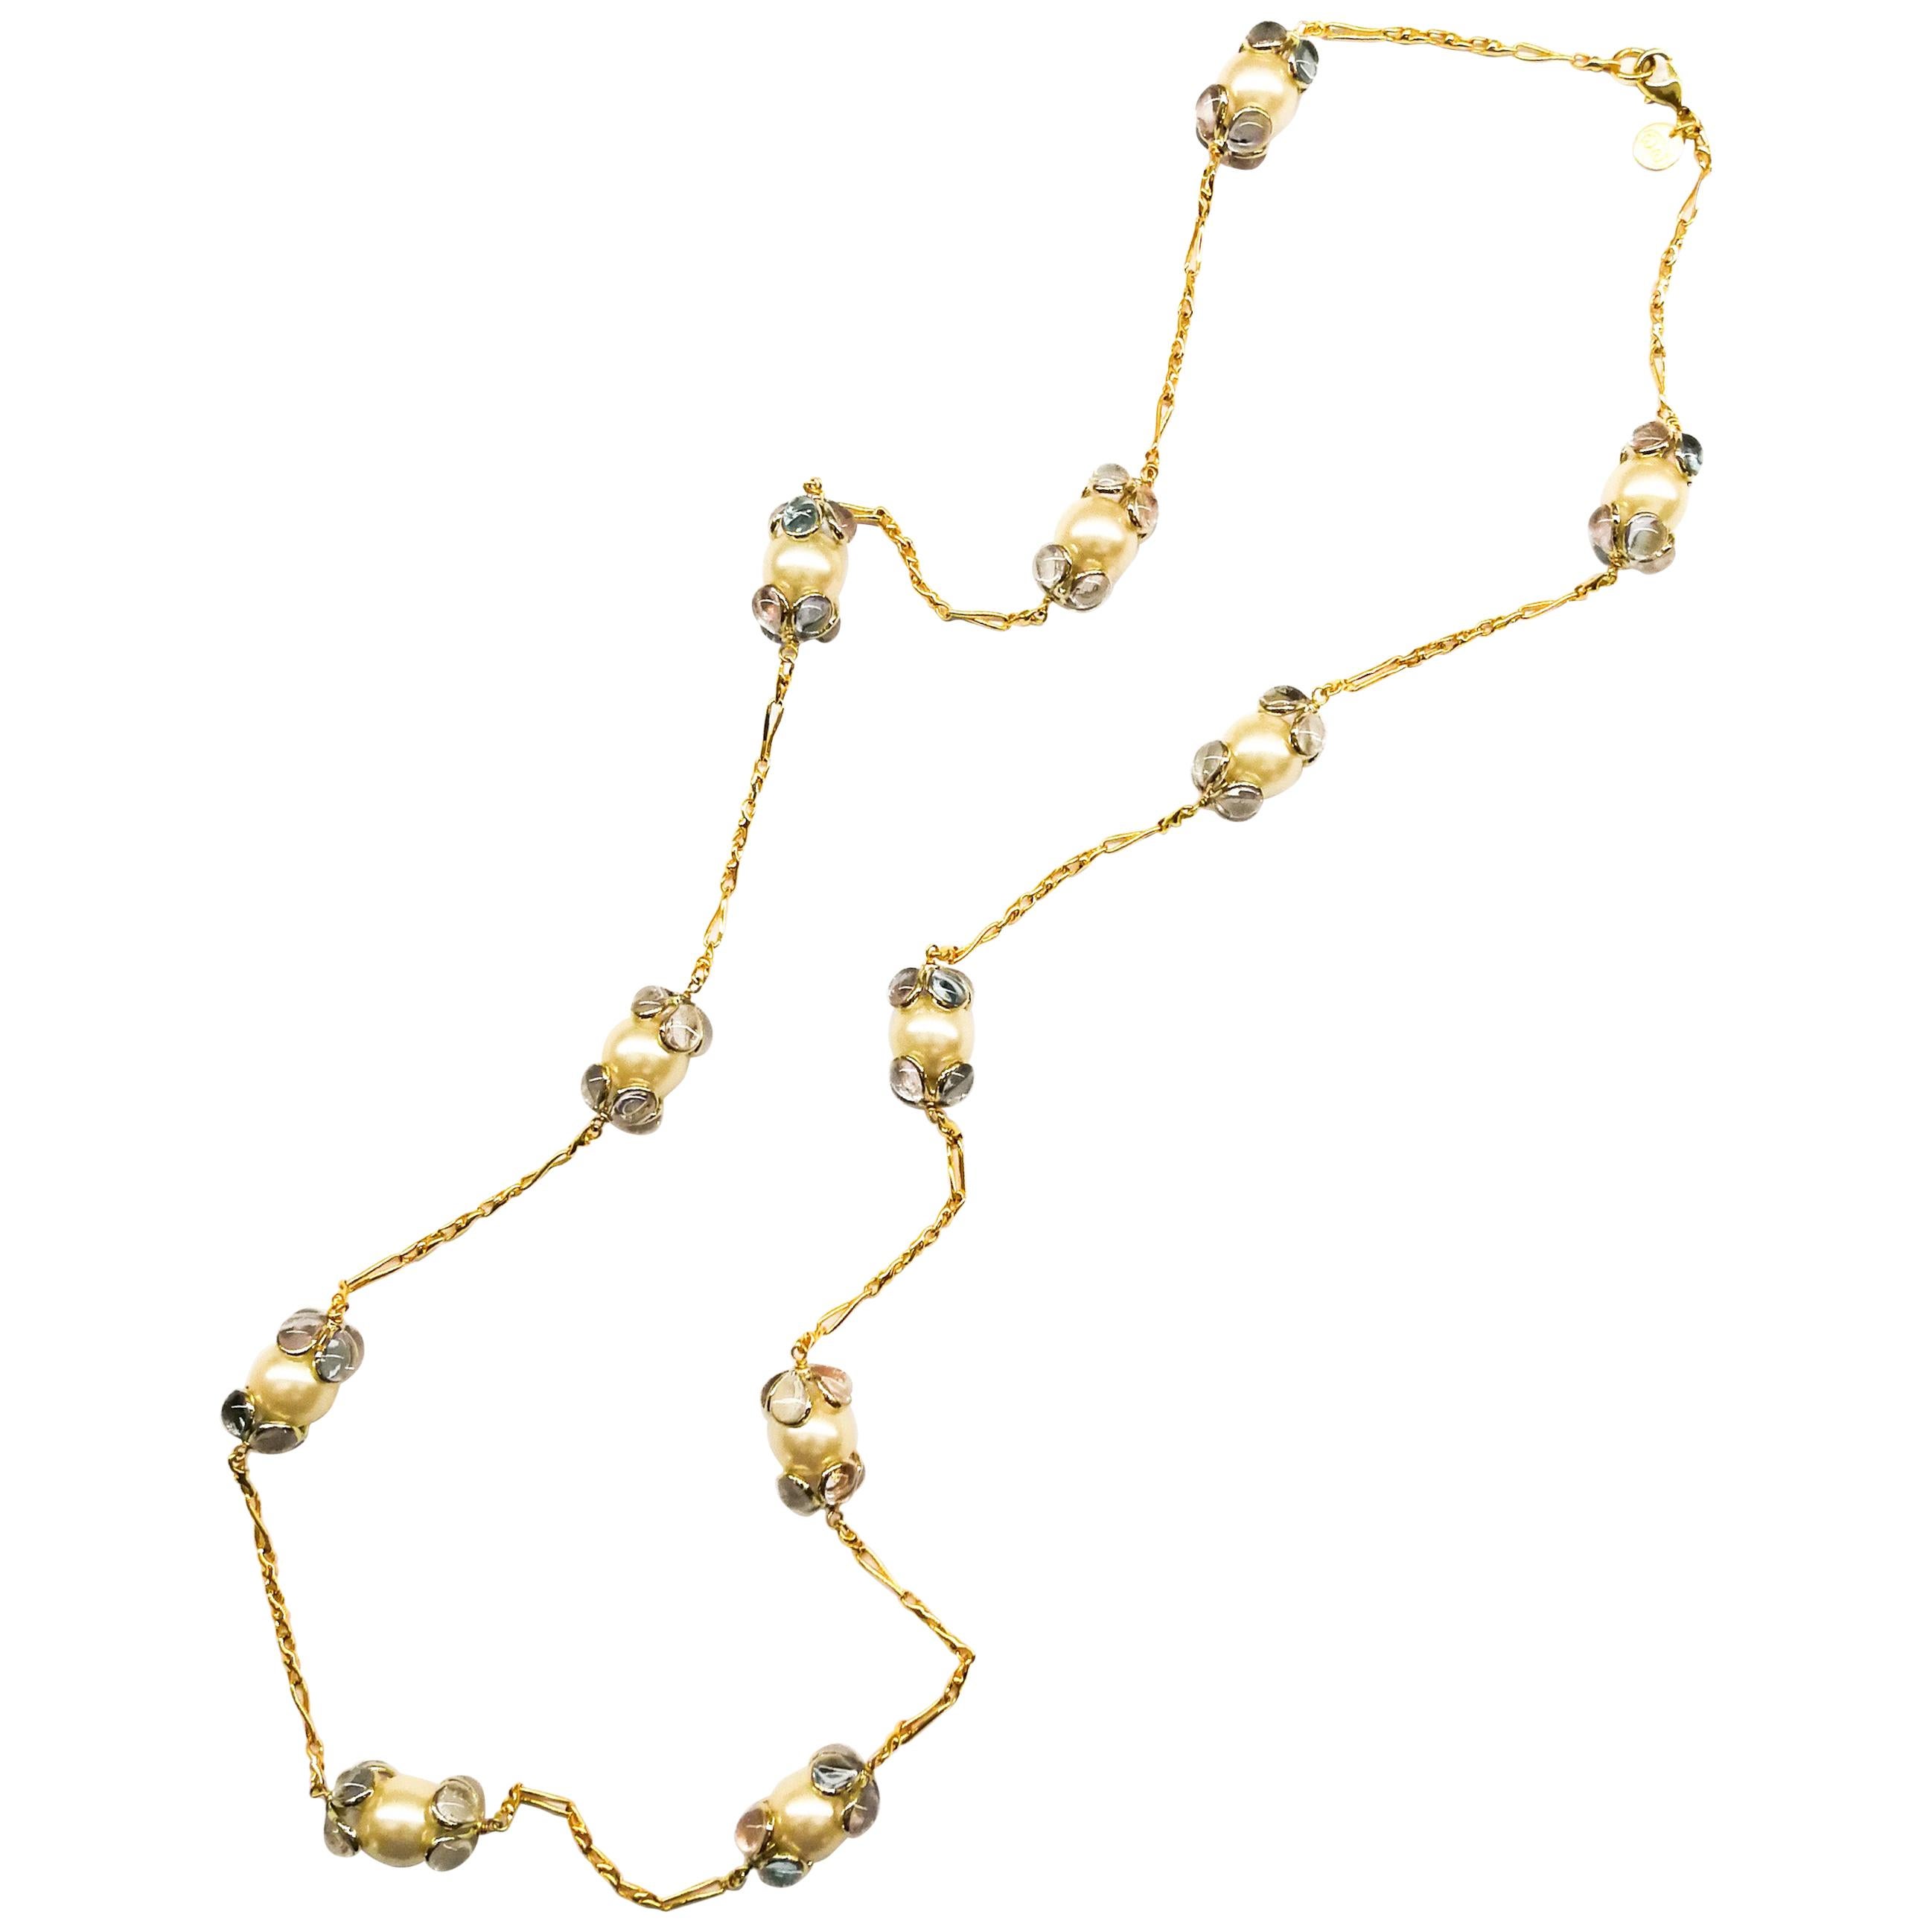 'WW' Collection long poured glass, pearl and gilt chain sautoir, France, 2018